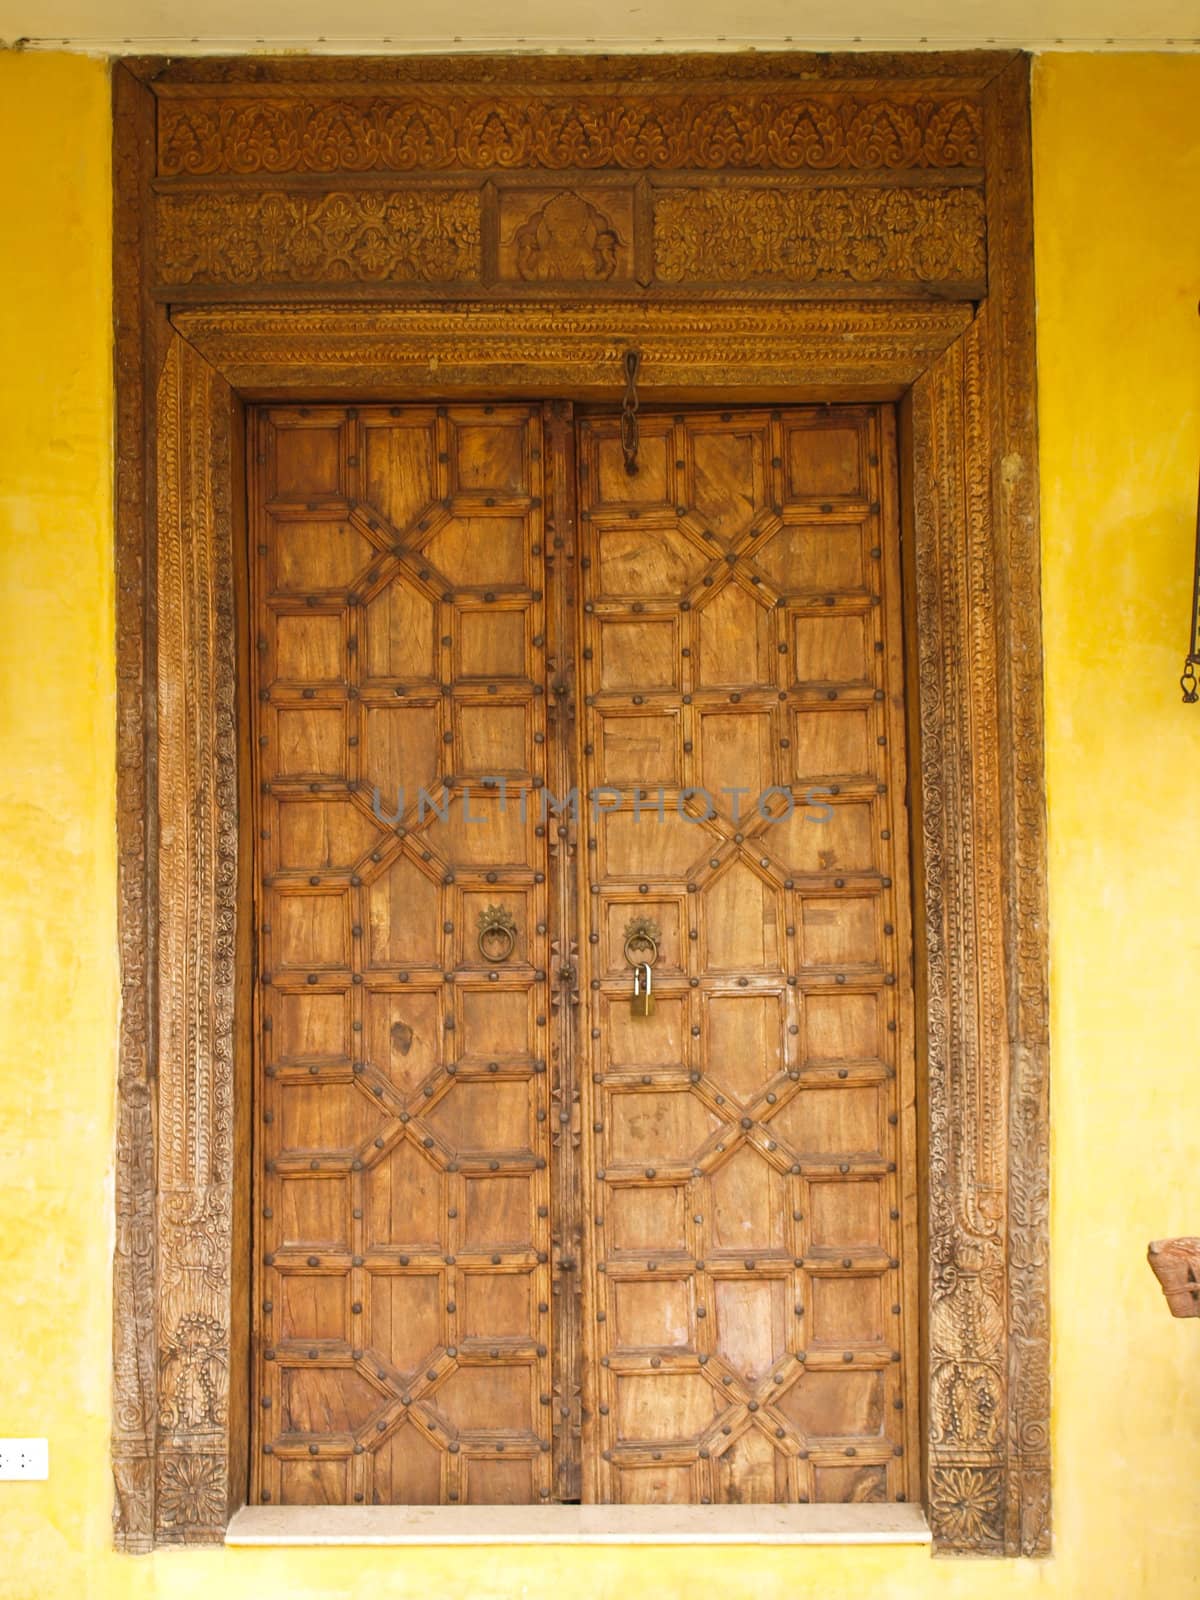 Antique Moroccan style wooden door on yellow wall